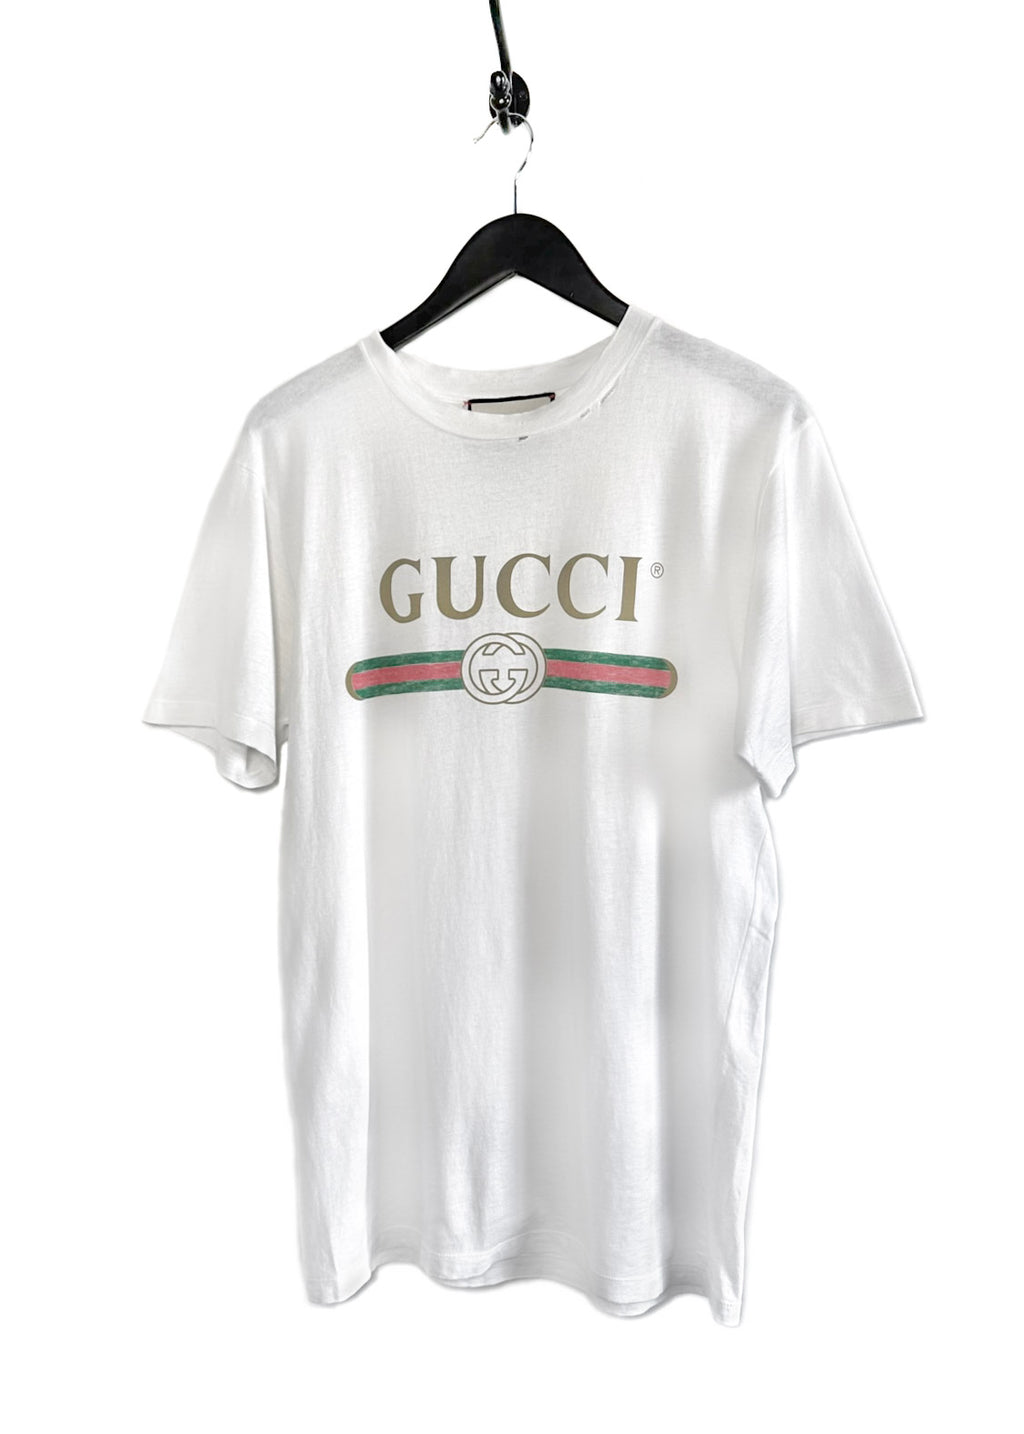 Gucci White Logo Flower Embroidered Distressed Oversized T-shirt